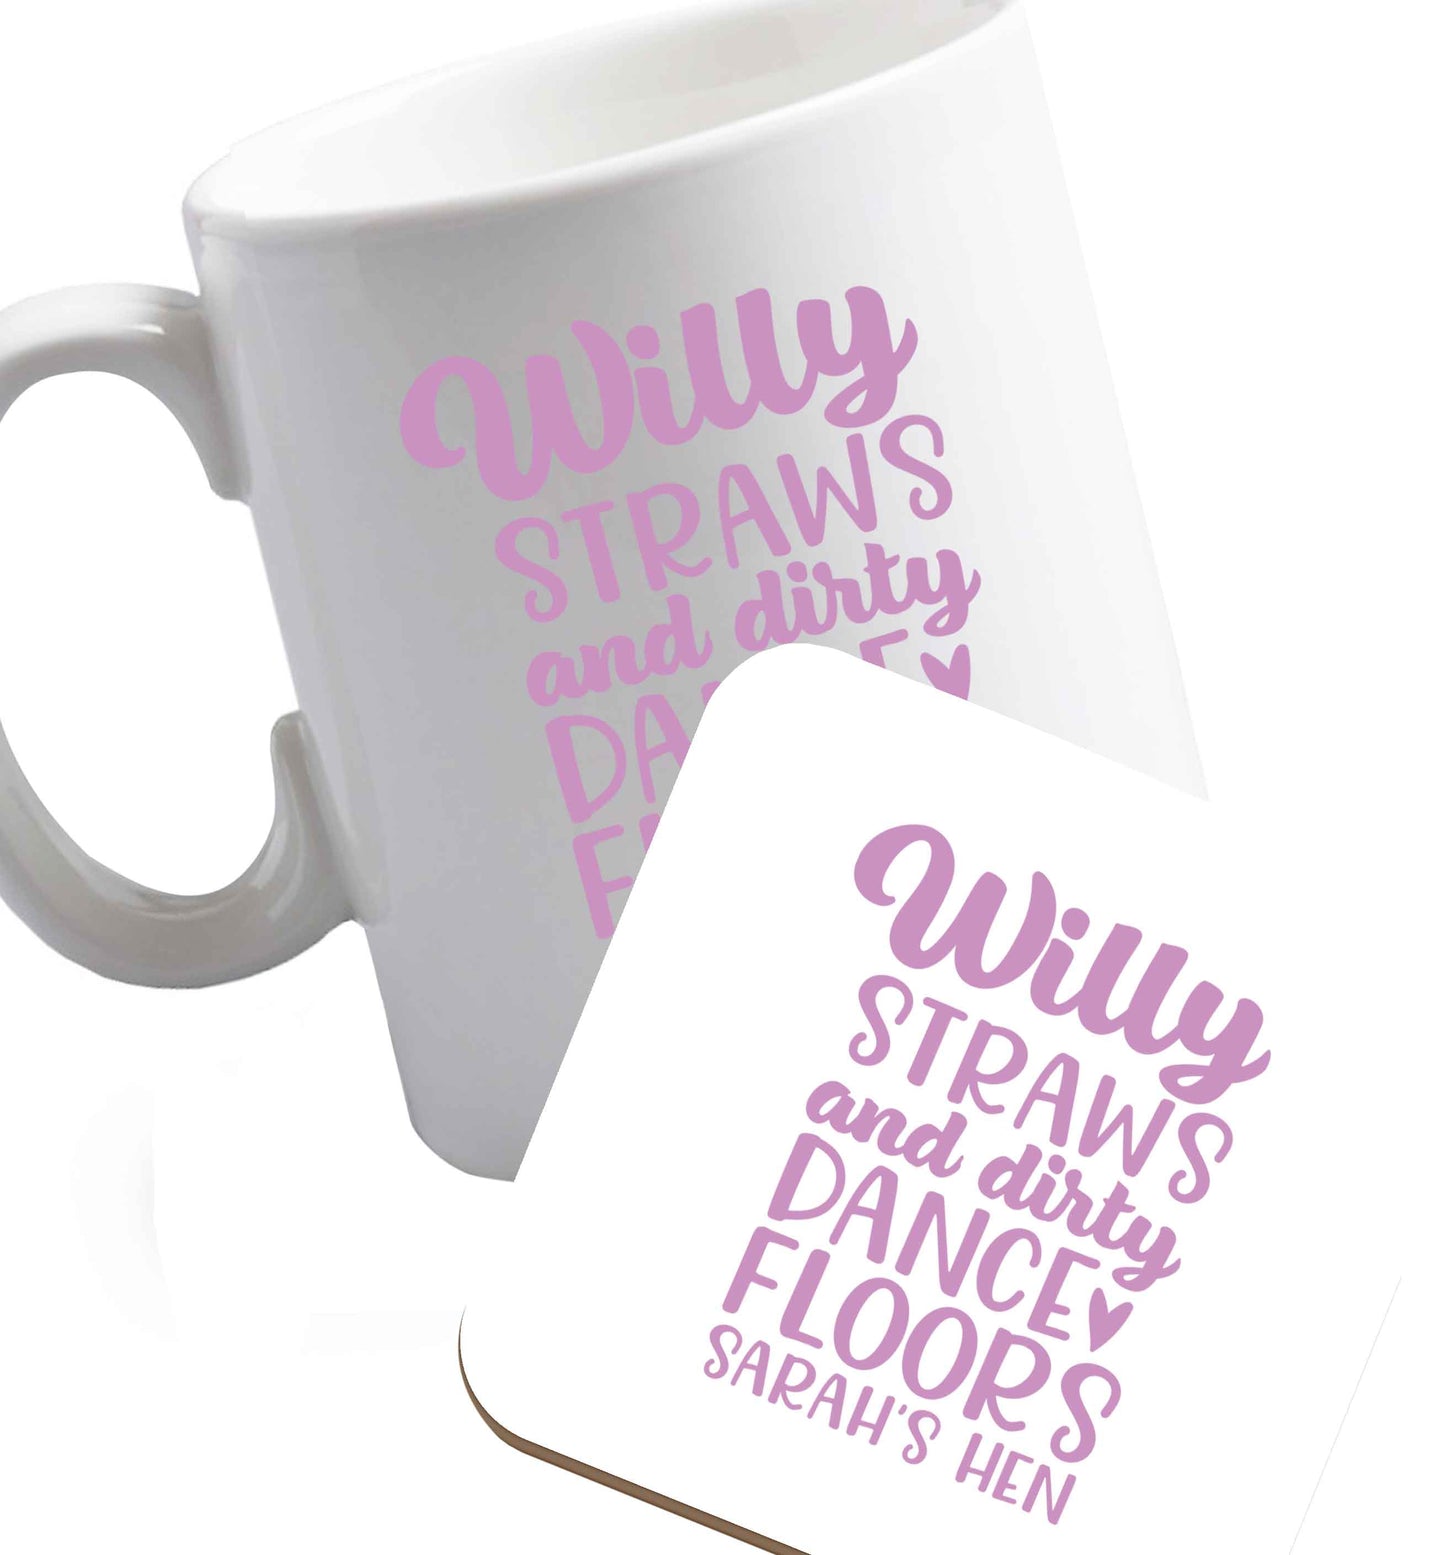 10 oz Willy straws and dirty dance floors   ceramic mug and coaster set right handed